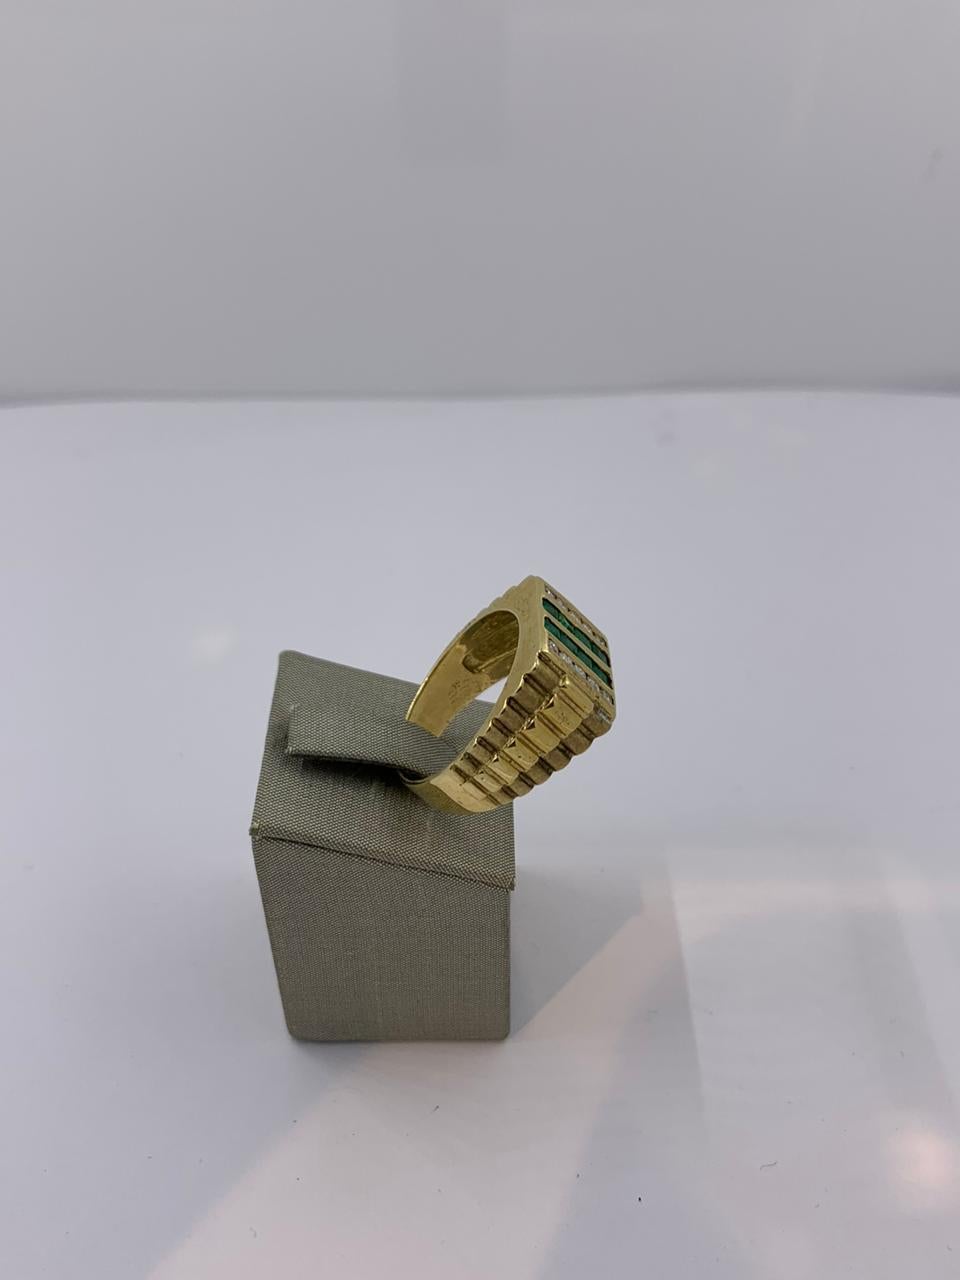 Men's Ring
Emerald and Diamond ring set in 14Kt Gold
Emeralds 0.85
Diamond 0.31 ct
21-11354